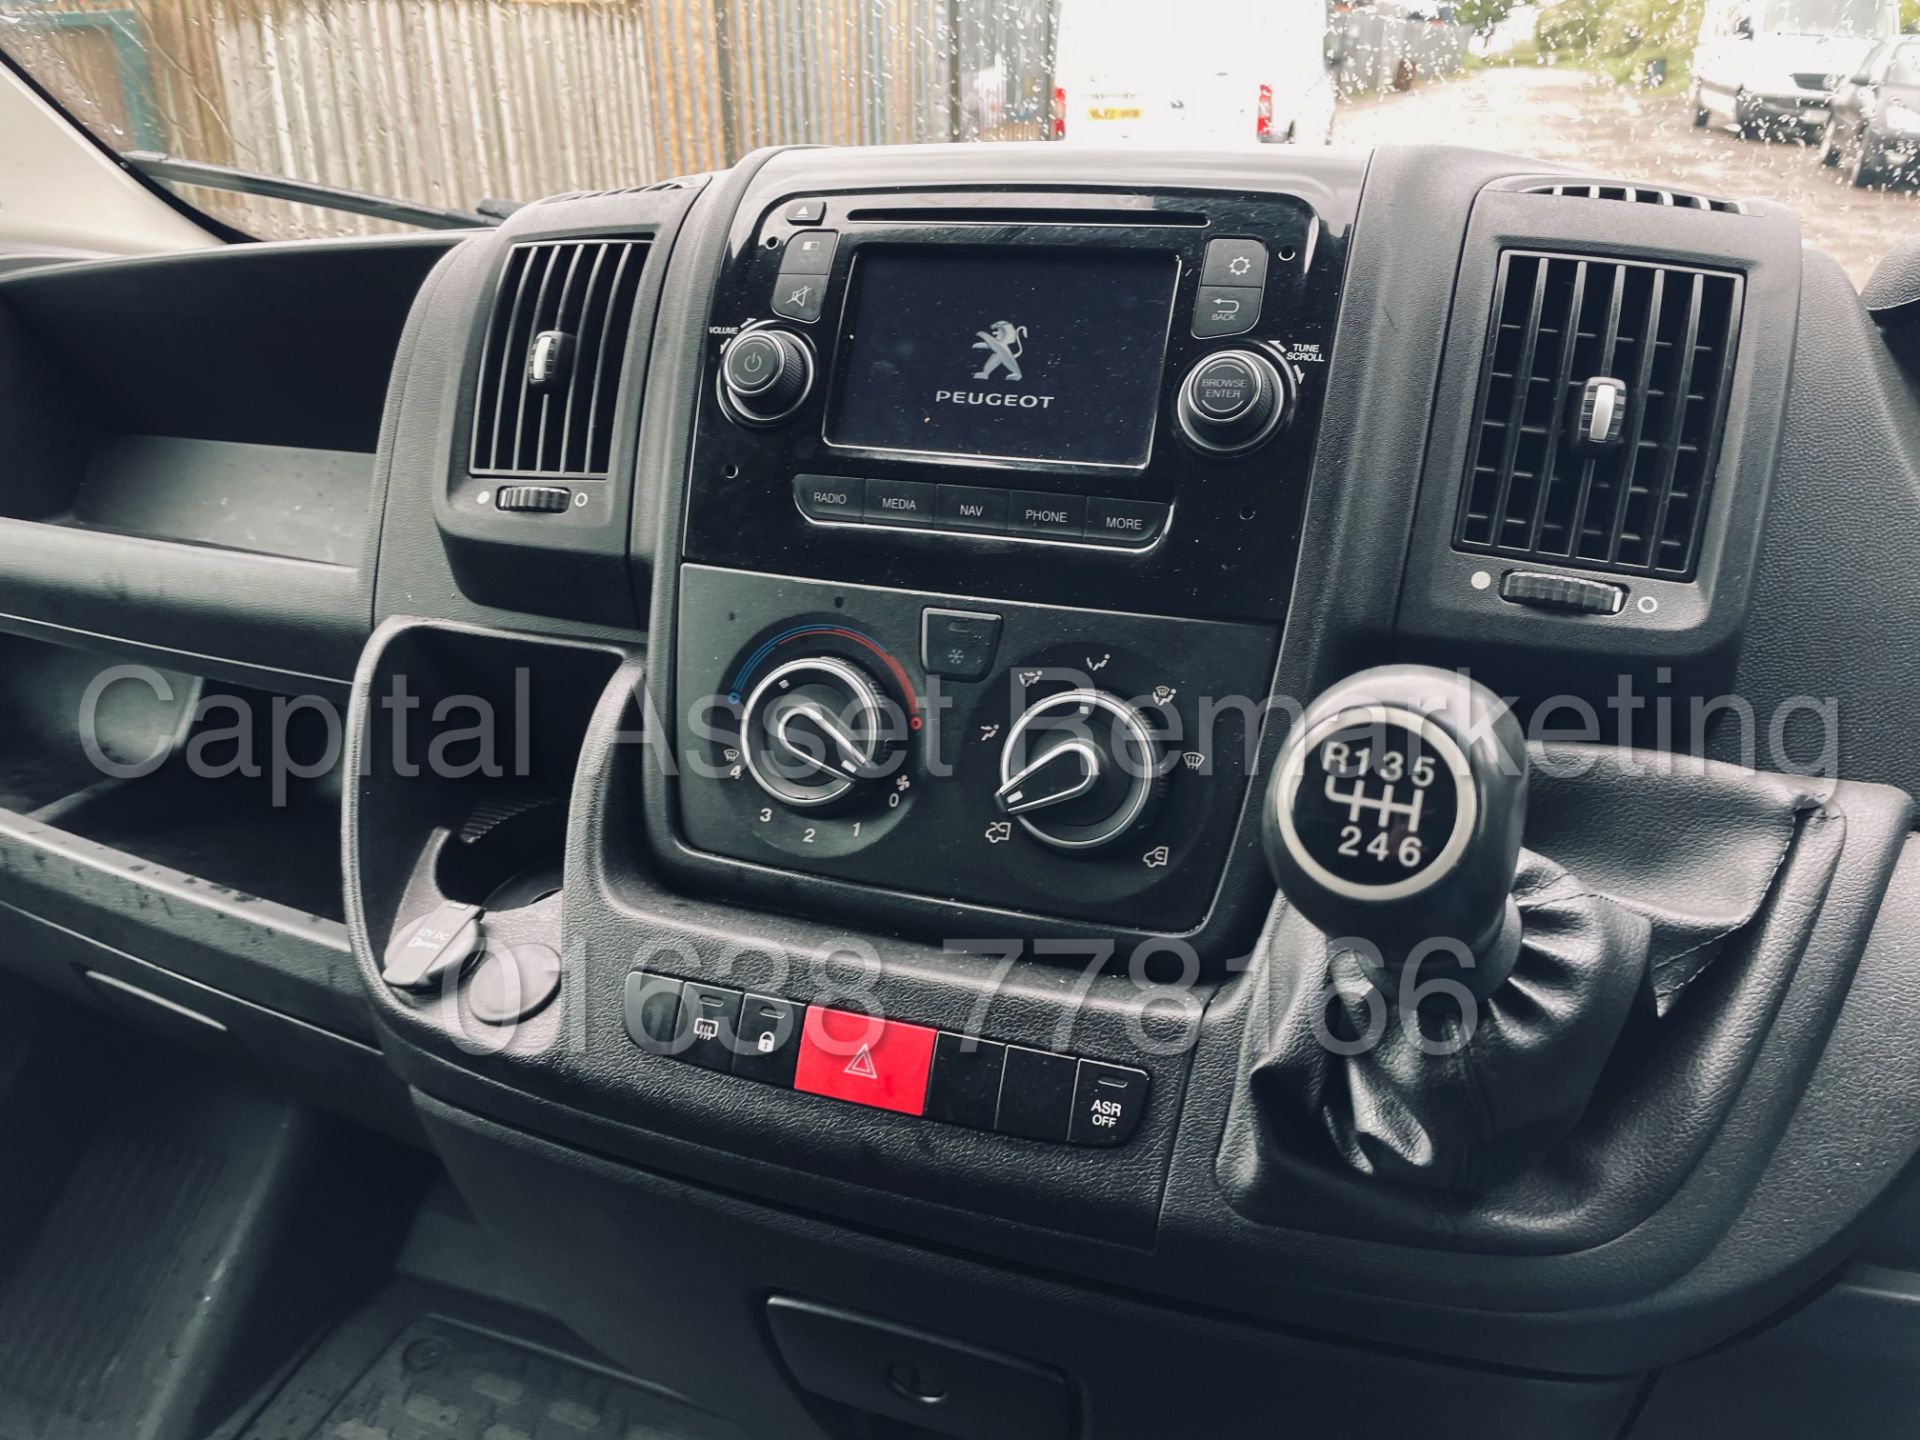 (On Sale) PEUGEOT BOXER 335 *PROFESSIONAL* LWB HI-ROOF (2016) '2.2 HDI - 6 SPEED' *A/C* (1 OWNER) - Image 33 of 41